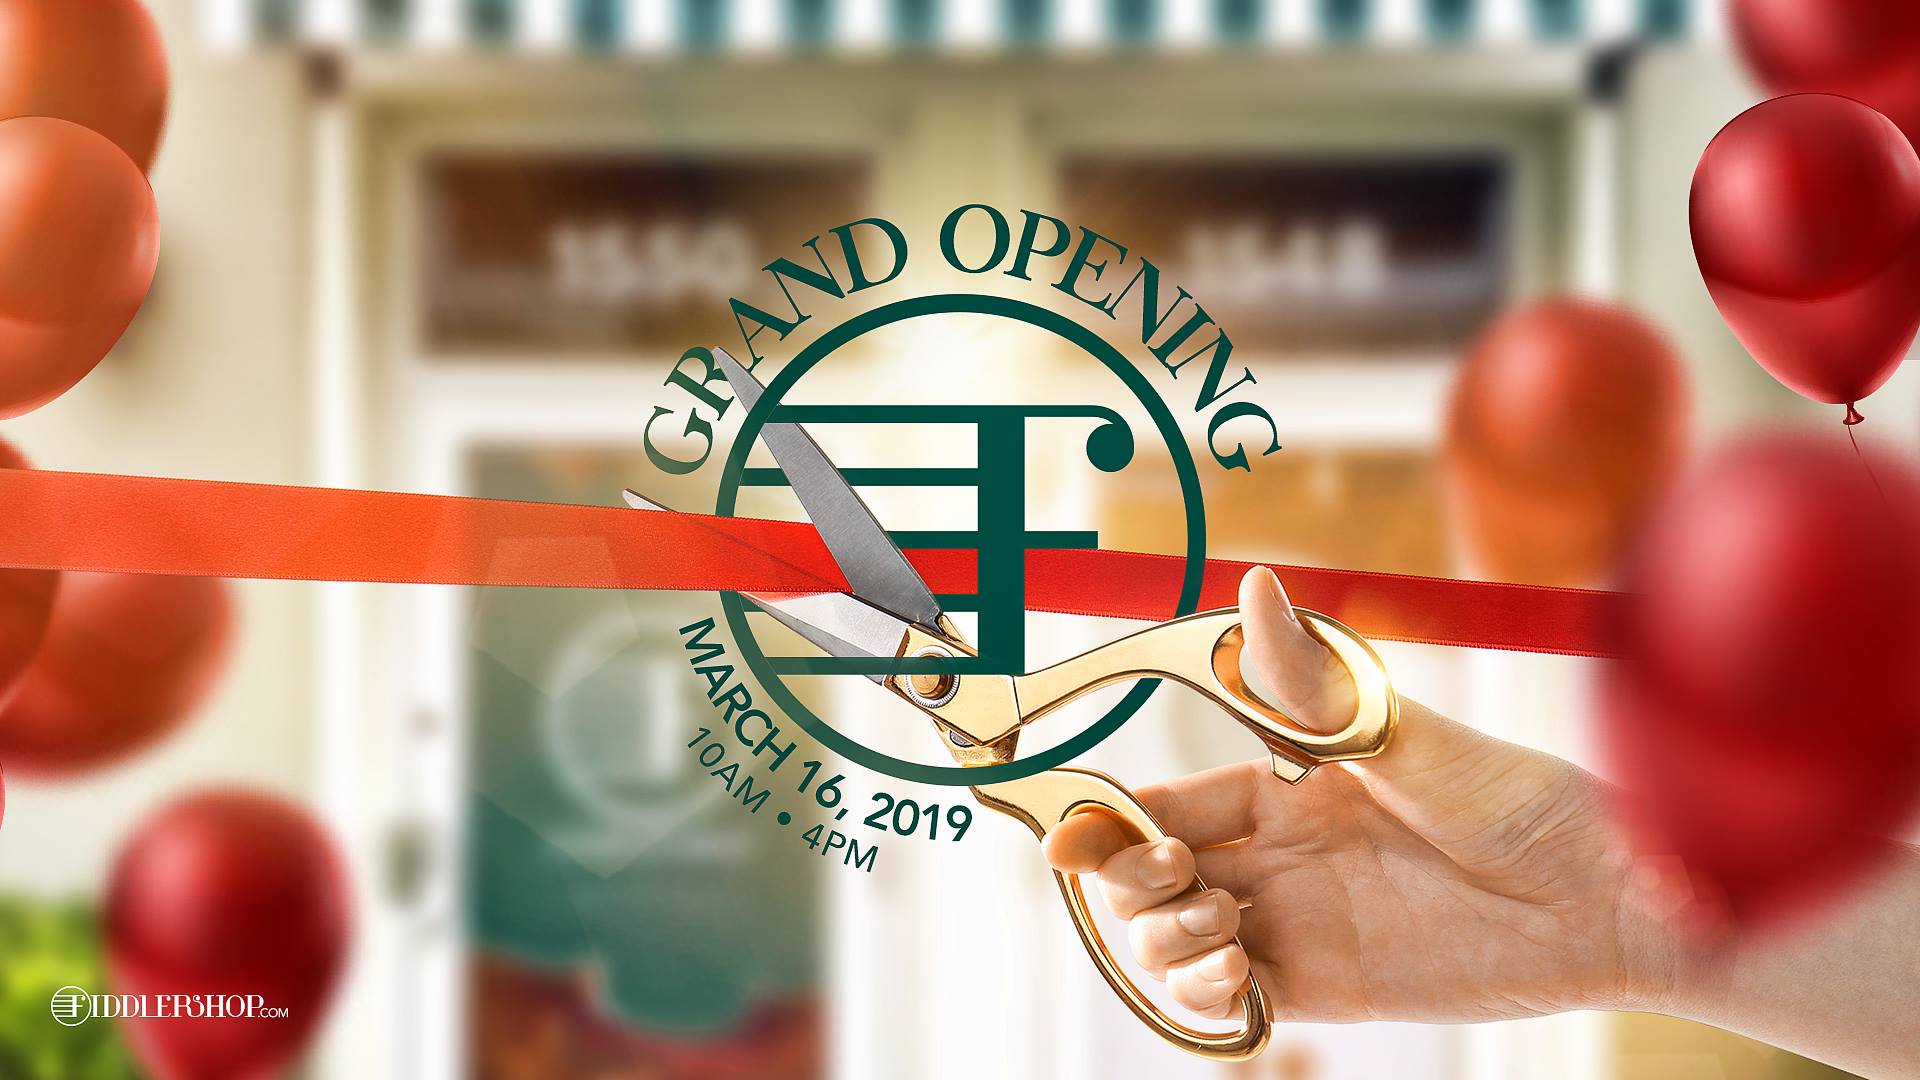 Showroom Grand Opening March 16th, 2019